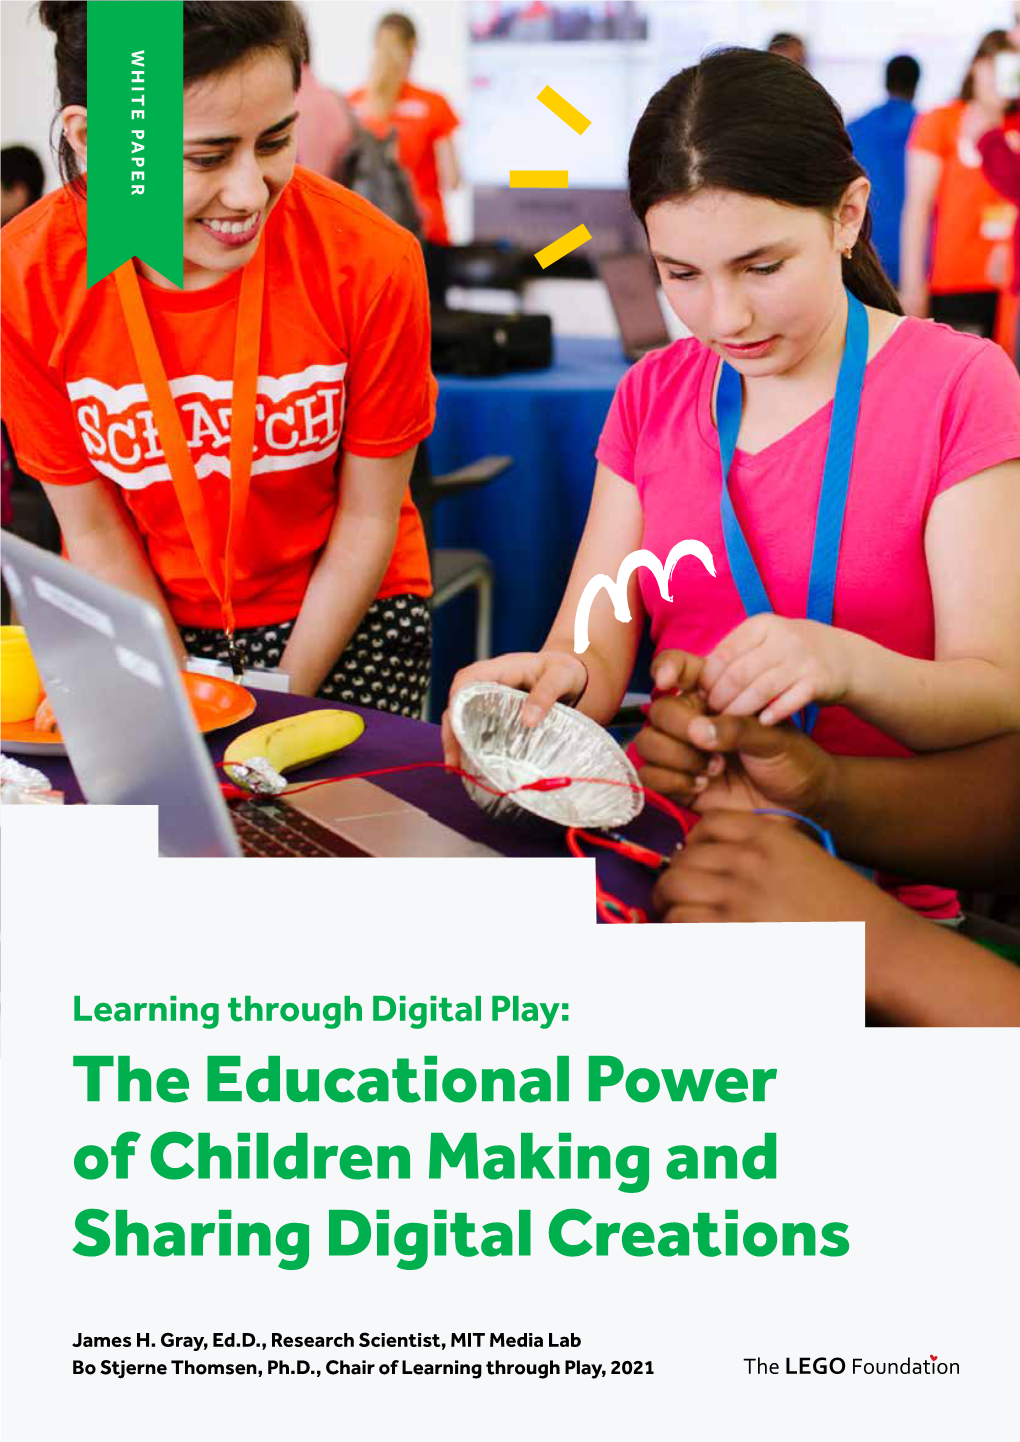 The Educational Power of Children Making and Sharing Digital Creations